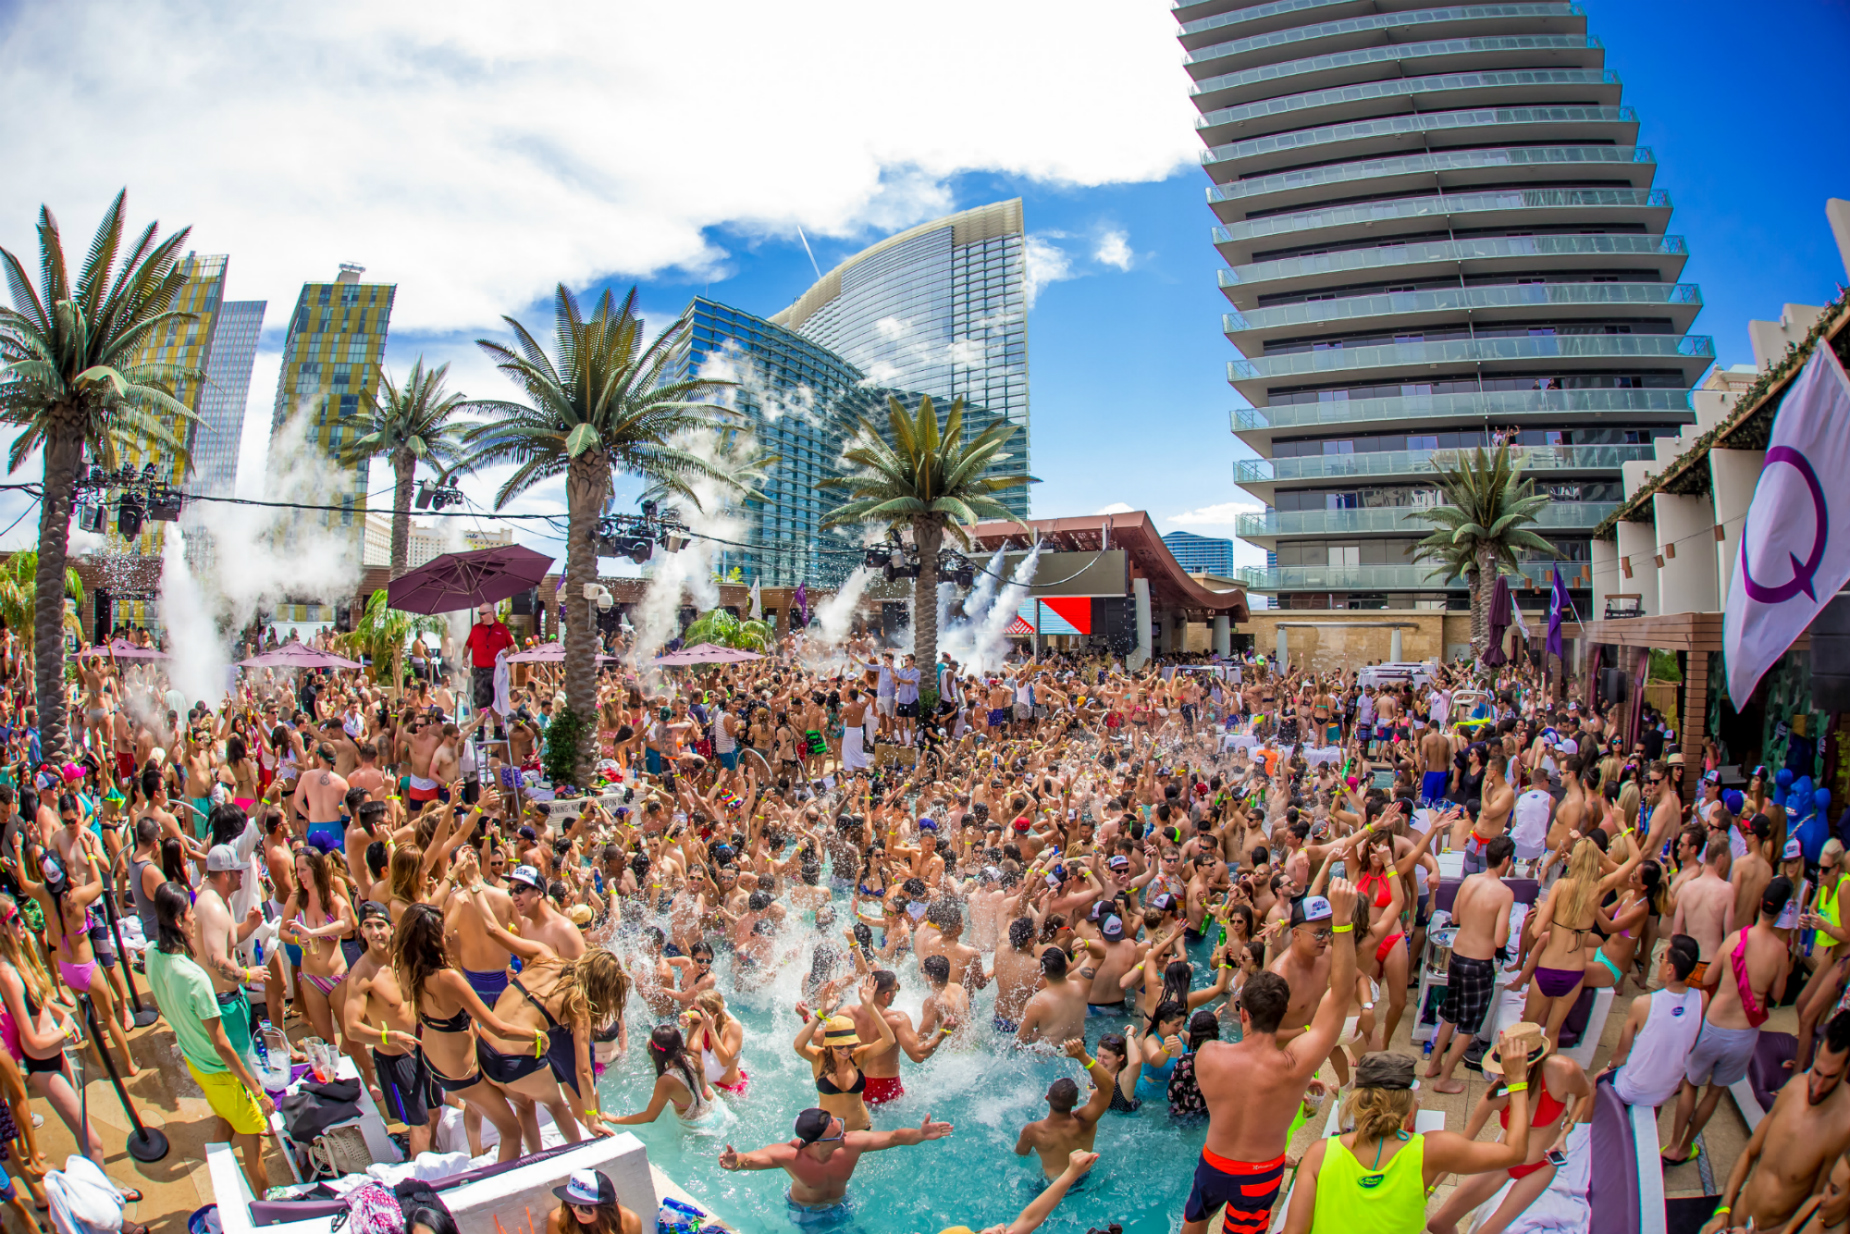 The 10 Best Las Vegas Pool Parties & Dayclubs On The Strip, Ranked